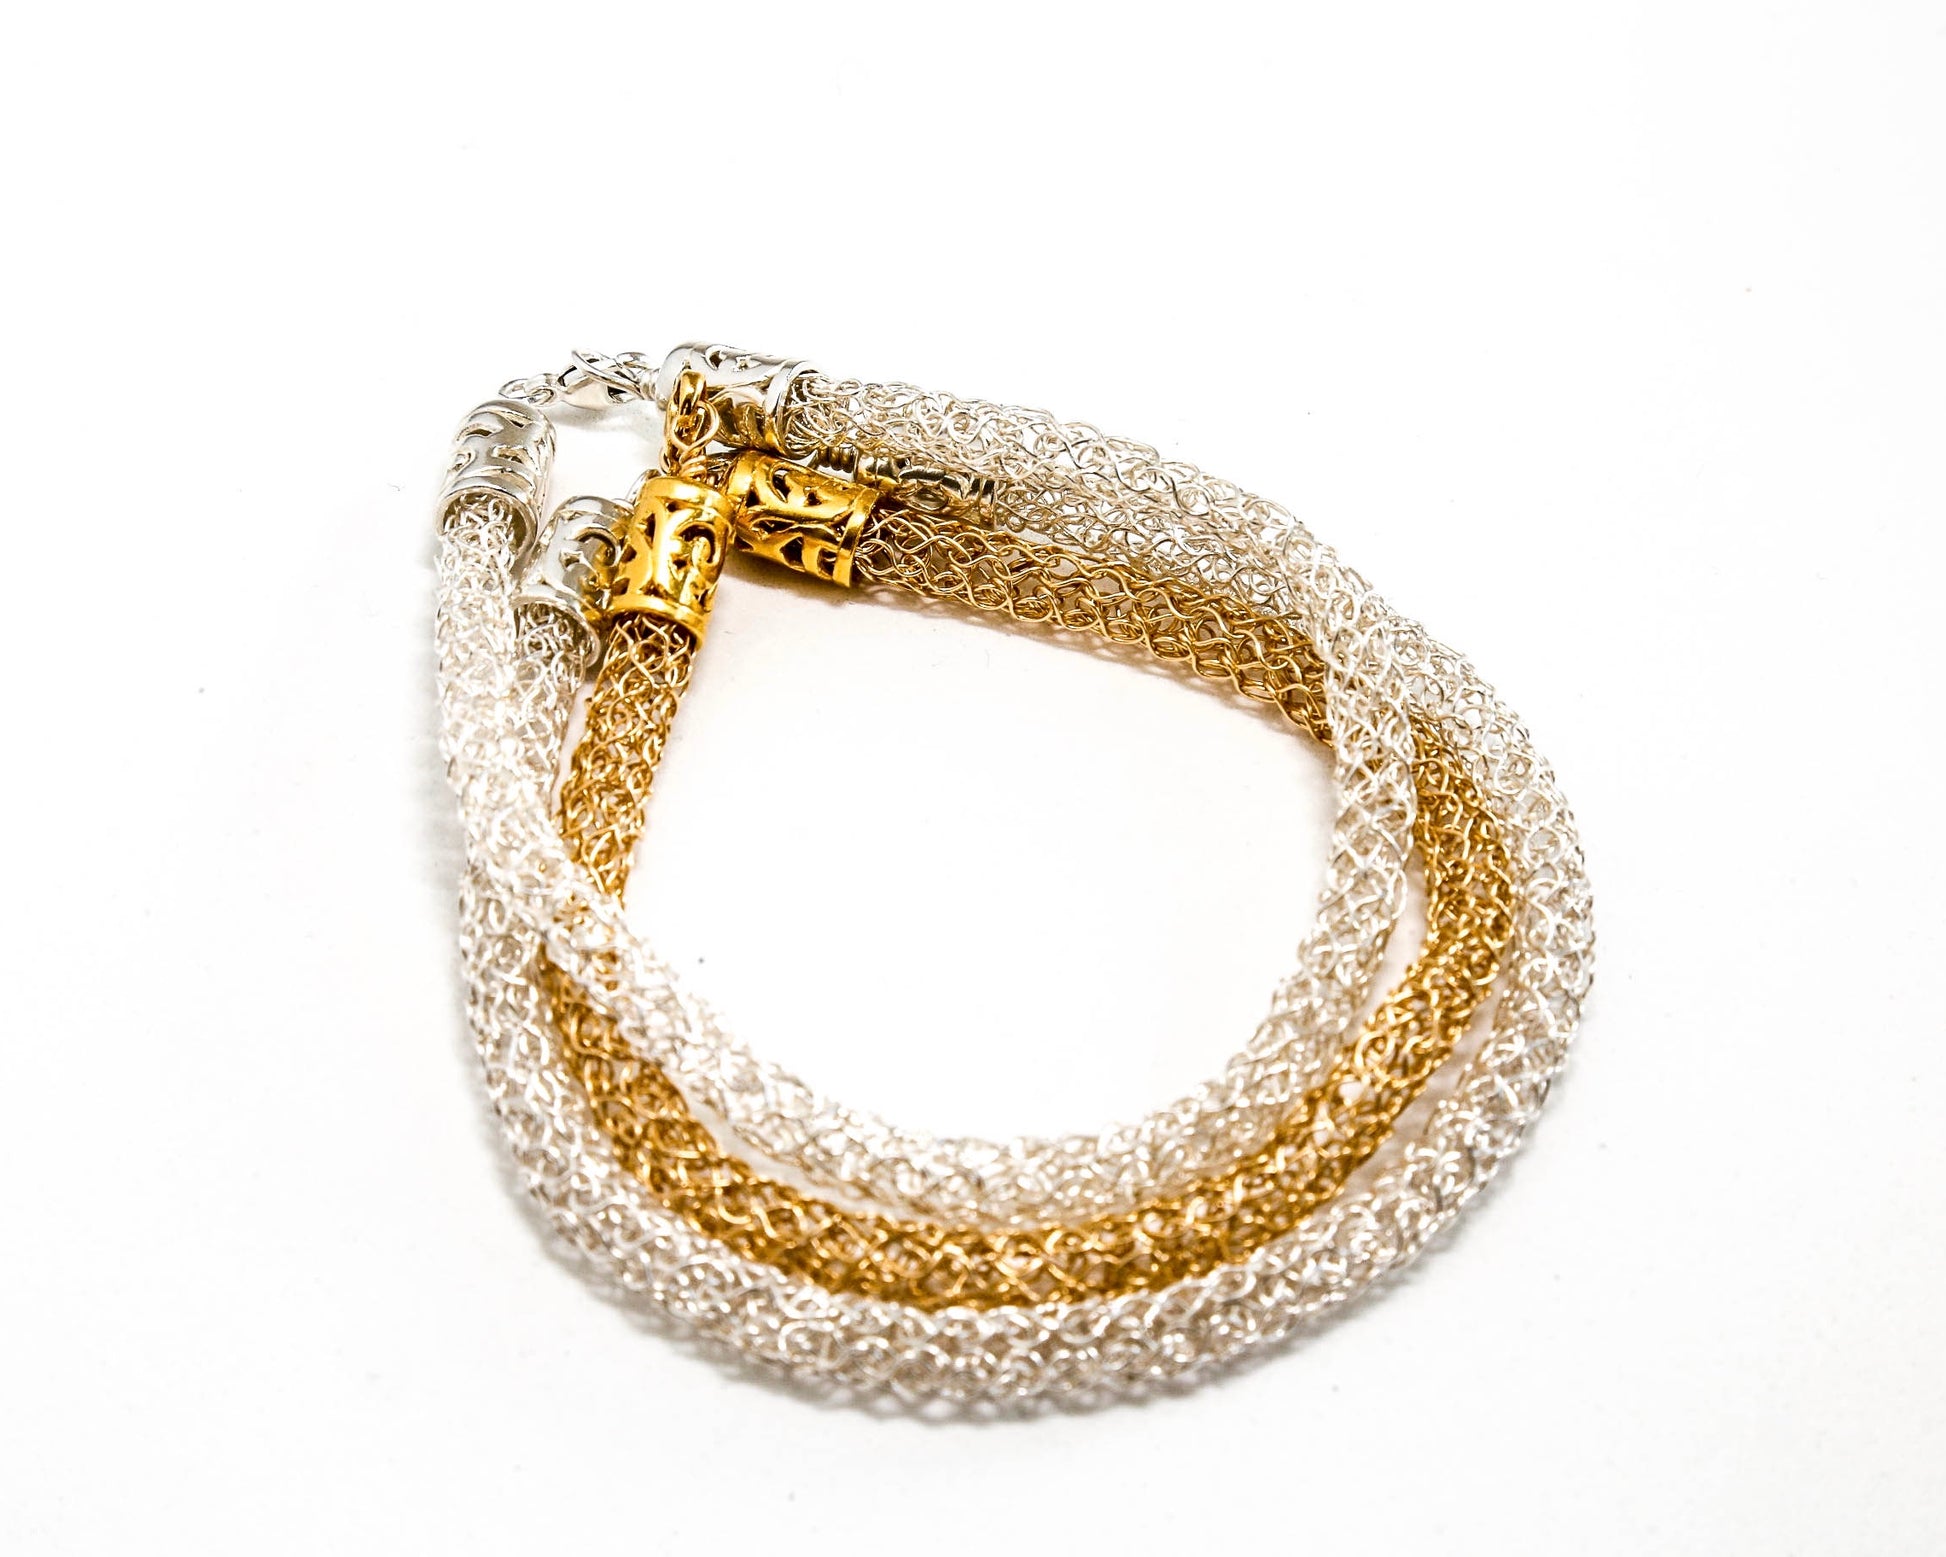 Hand knitted bracelet stack in Fine silver and Gold Filled